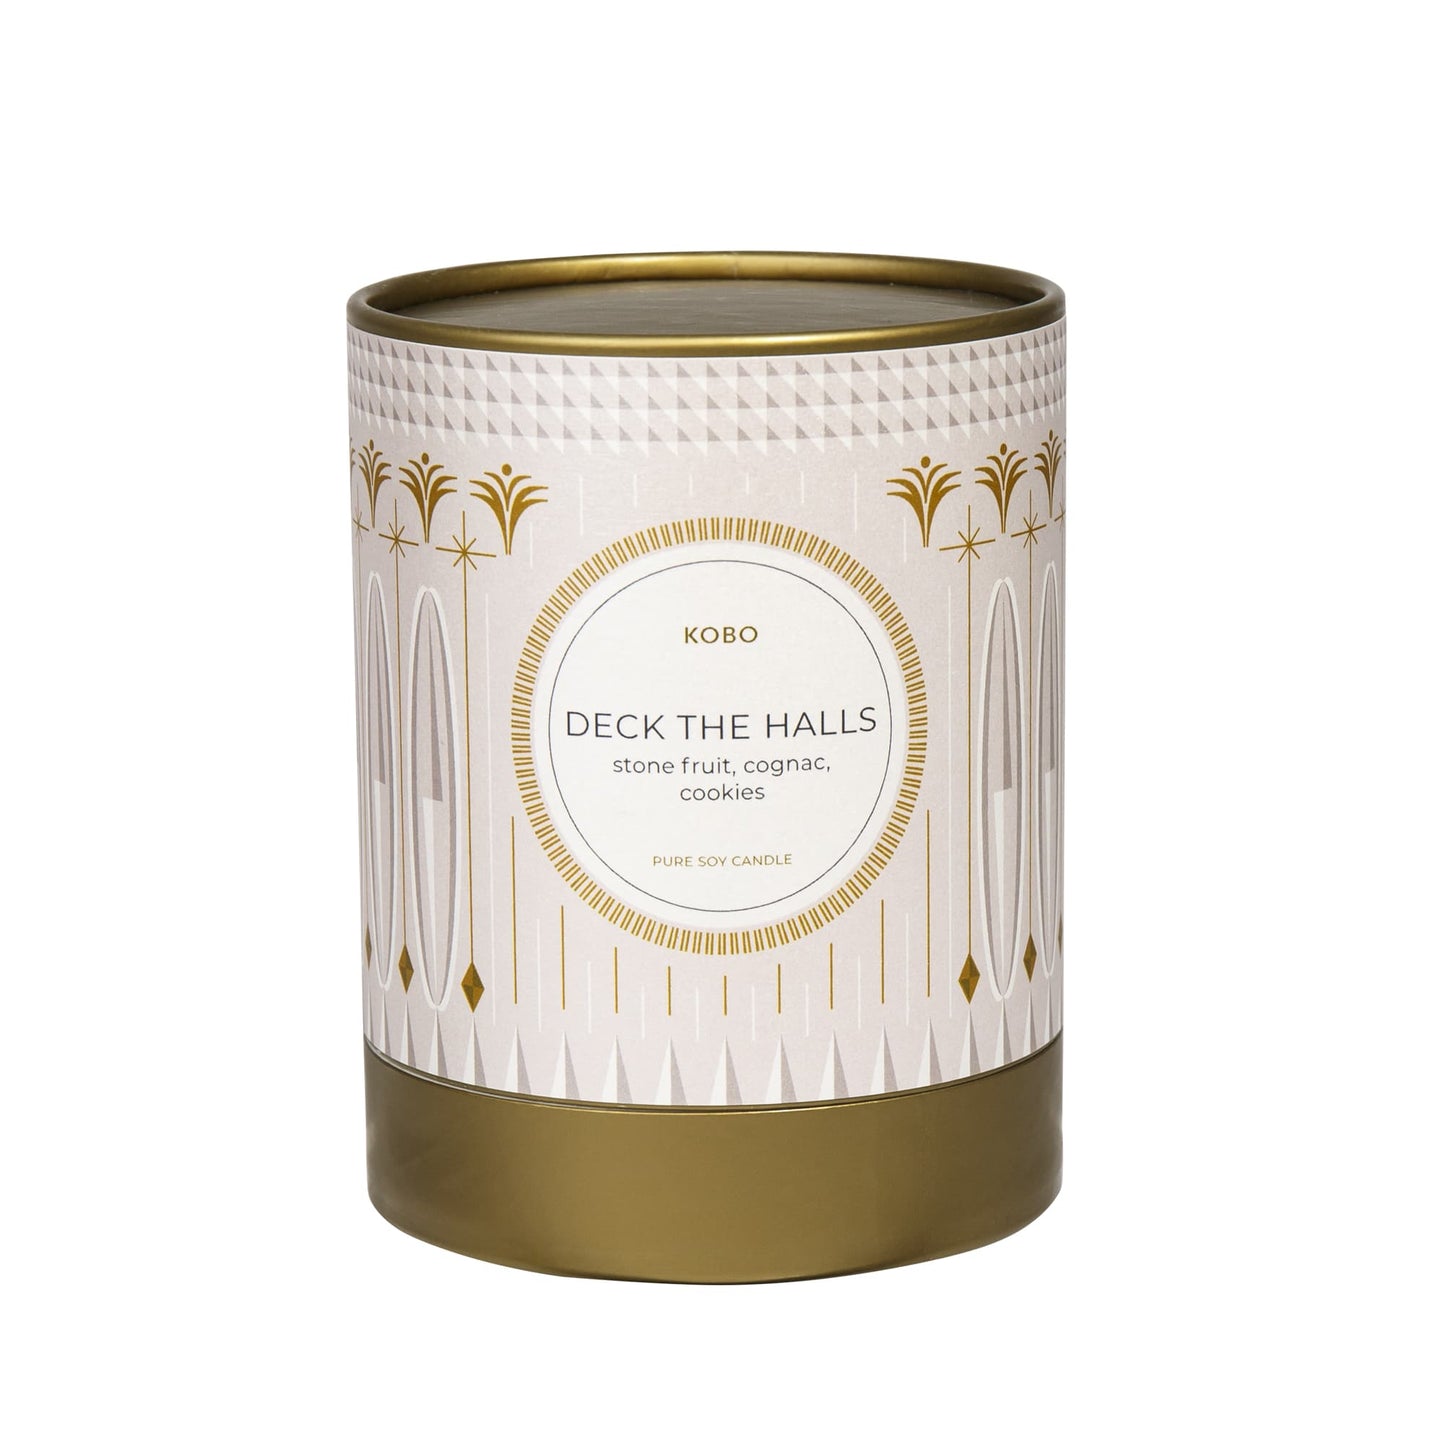 Alternate Image of Deck the Halls 11 oz Pure Soy Candle